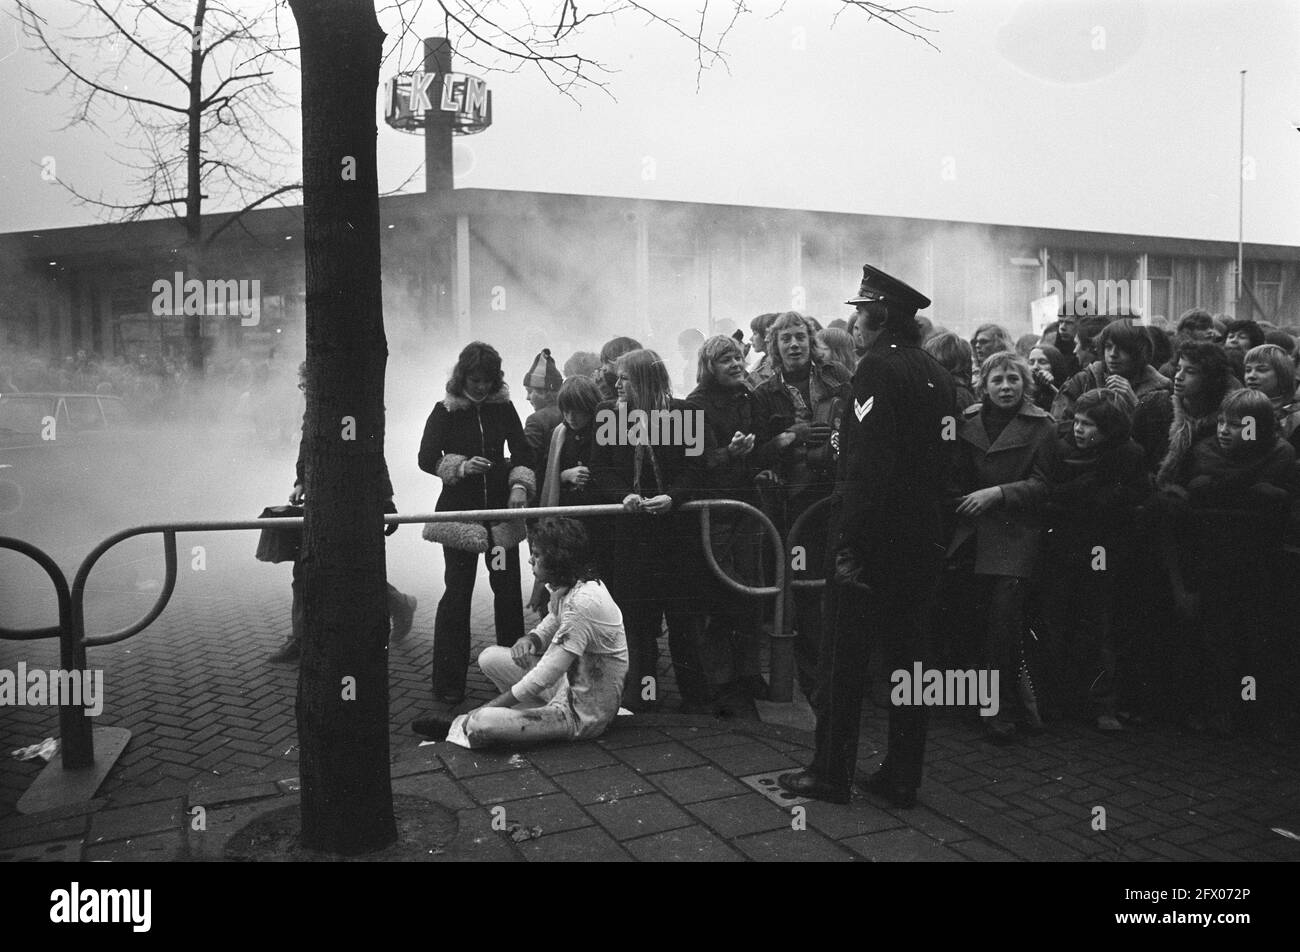 Scholars strike in Amsterdam to protest war in Vietnam, January 18, 1973, SCHOLIEREN, wars, protests, strikes, The Netherlands, 20th century press agency photo, news to remember, documentary, historic photography 1945-1990, visual stories, human history of the Twentieth Century, capturing moments in time Stock Photo